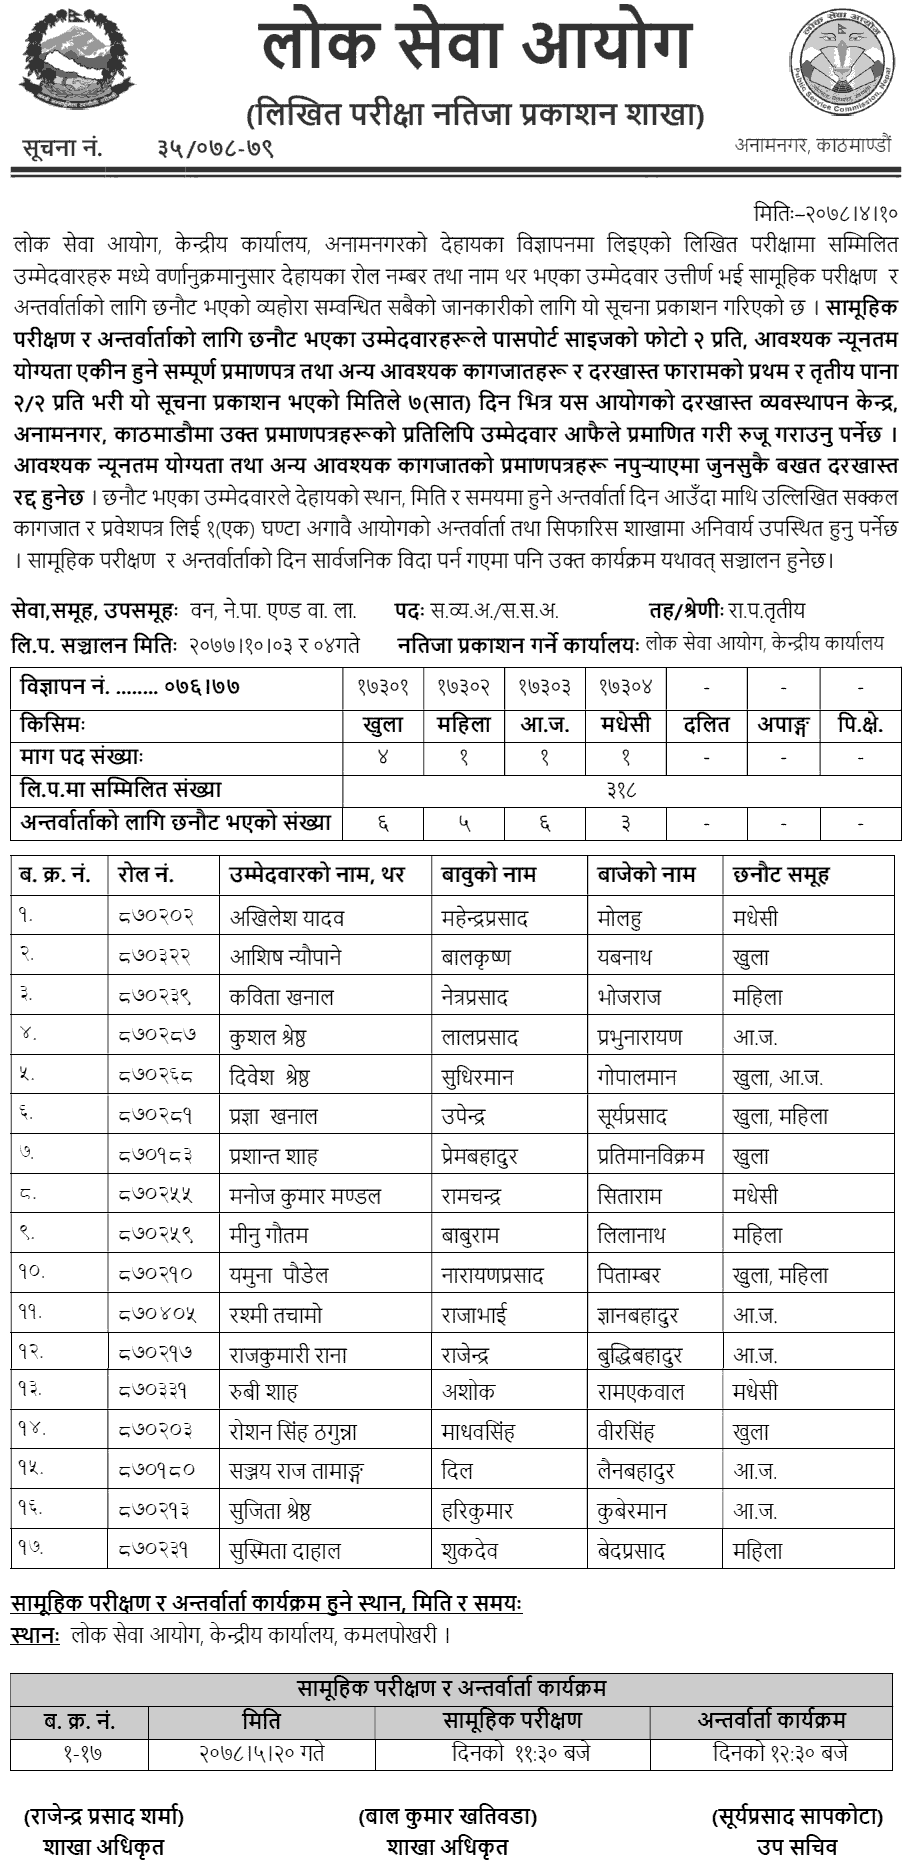 Lok Sewa Aayog Written Exam Result of National Parks and Wildlife Officer